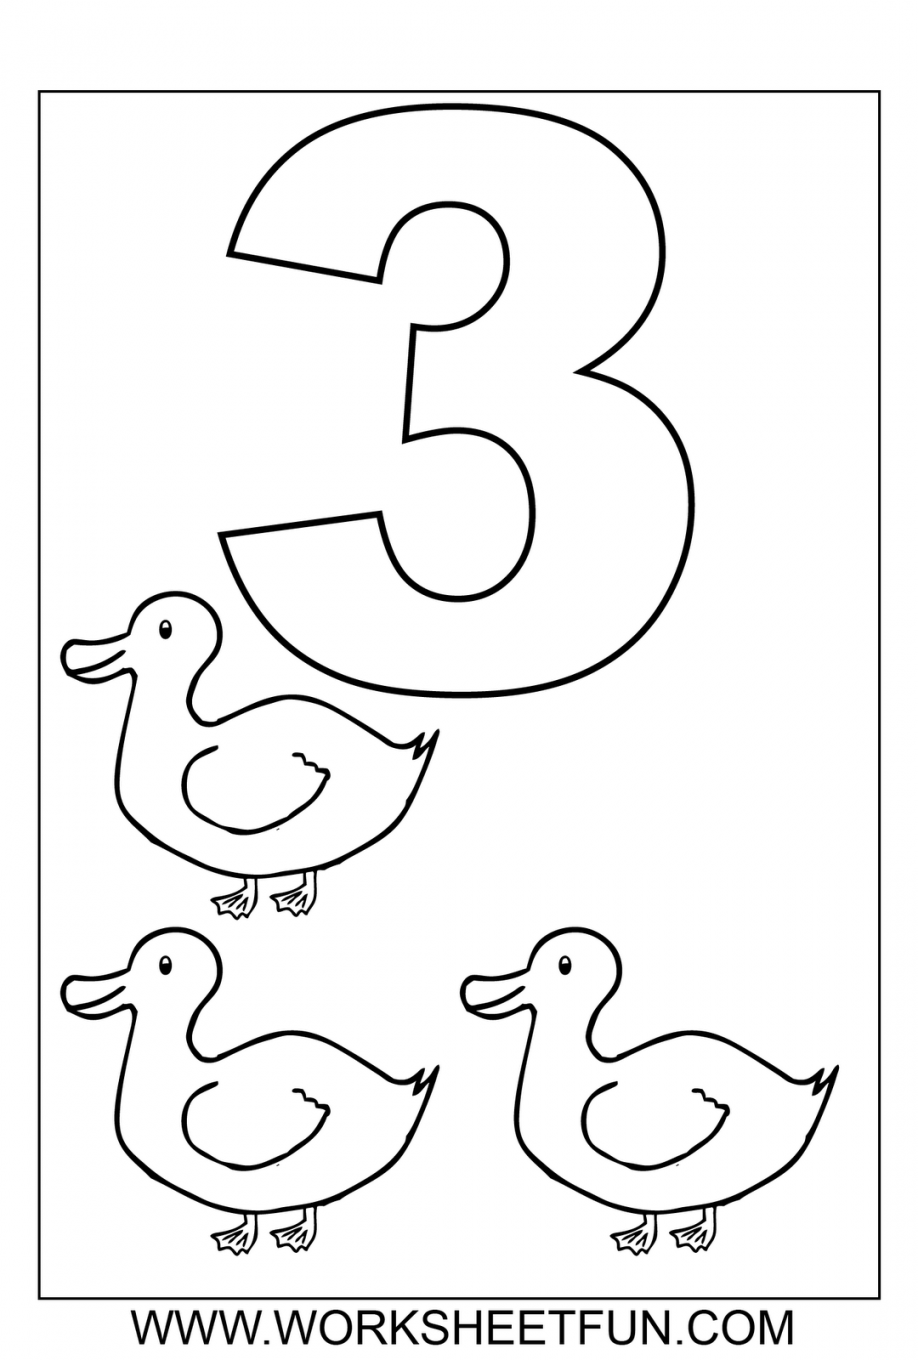 Number 20 20 Coloring Pages Numbers 20 20 Coloring Sheets. Kids ...